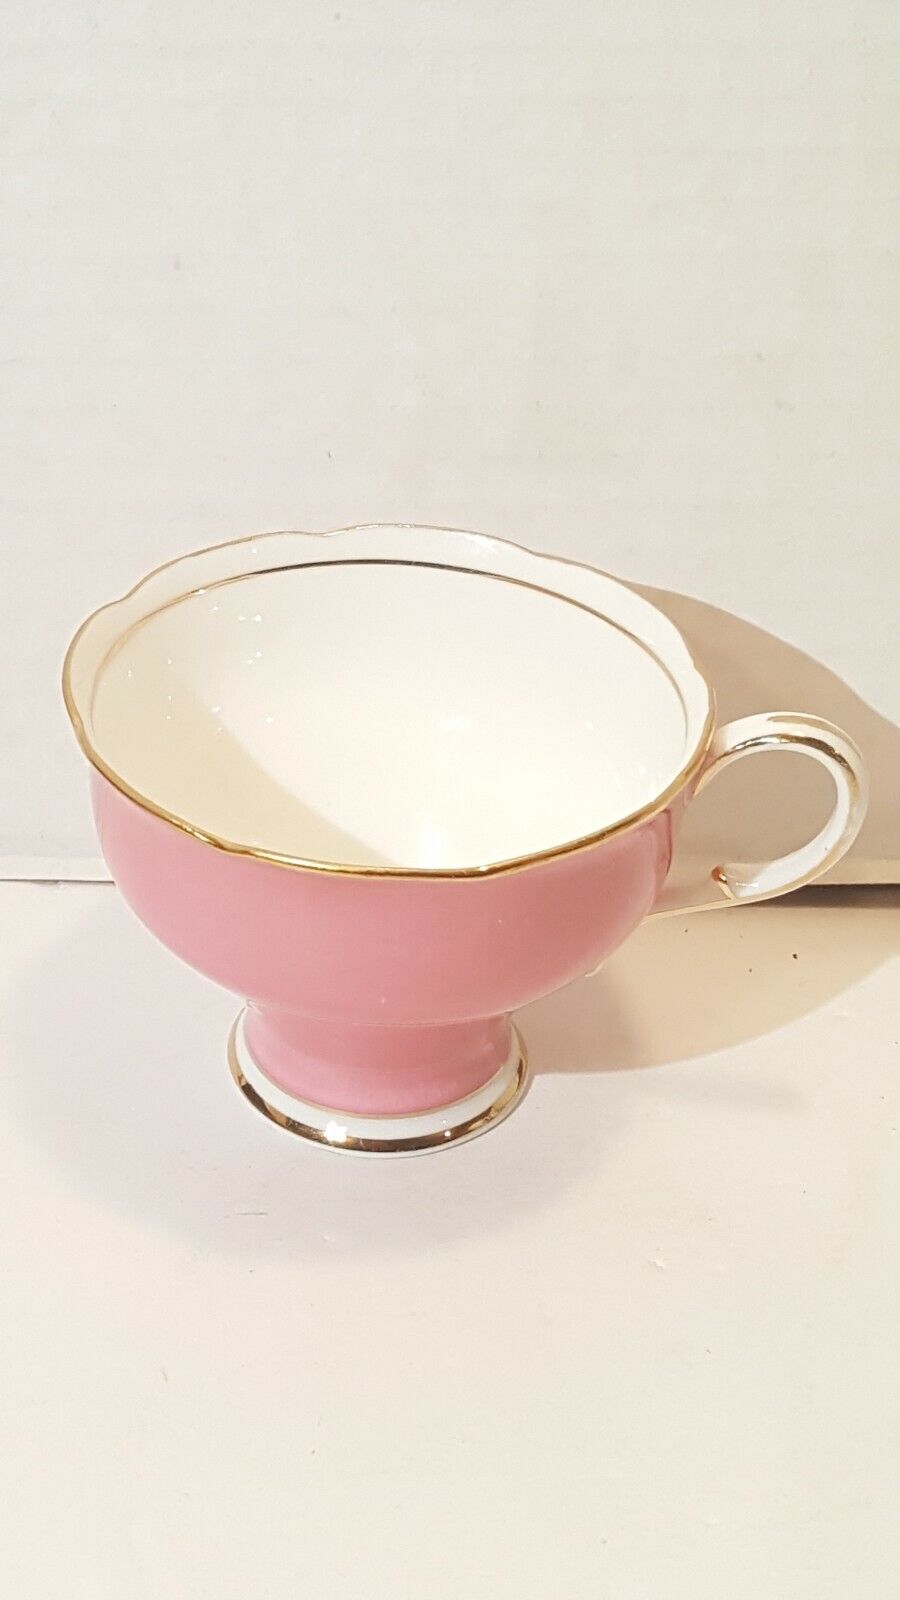 VINTAGE  PARAGON MINI PINK AND GOLD TEA CUP  BONE CHINA ENGLAND SCALLOPED EDGES